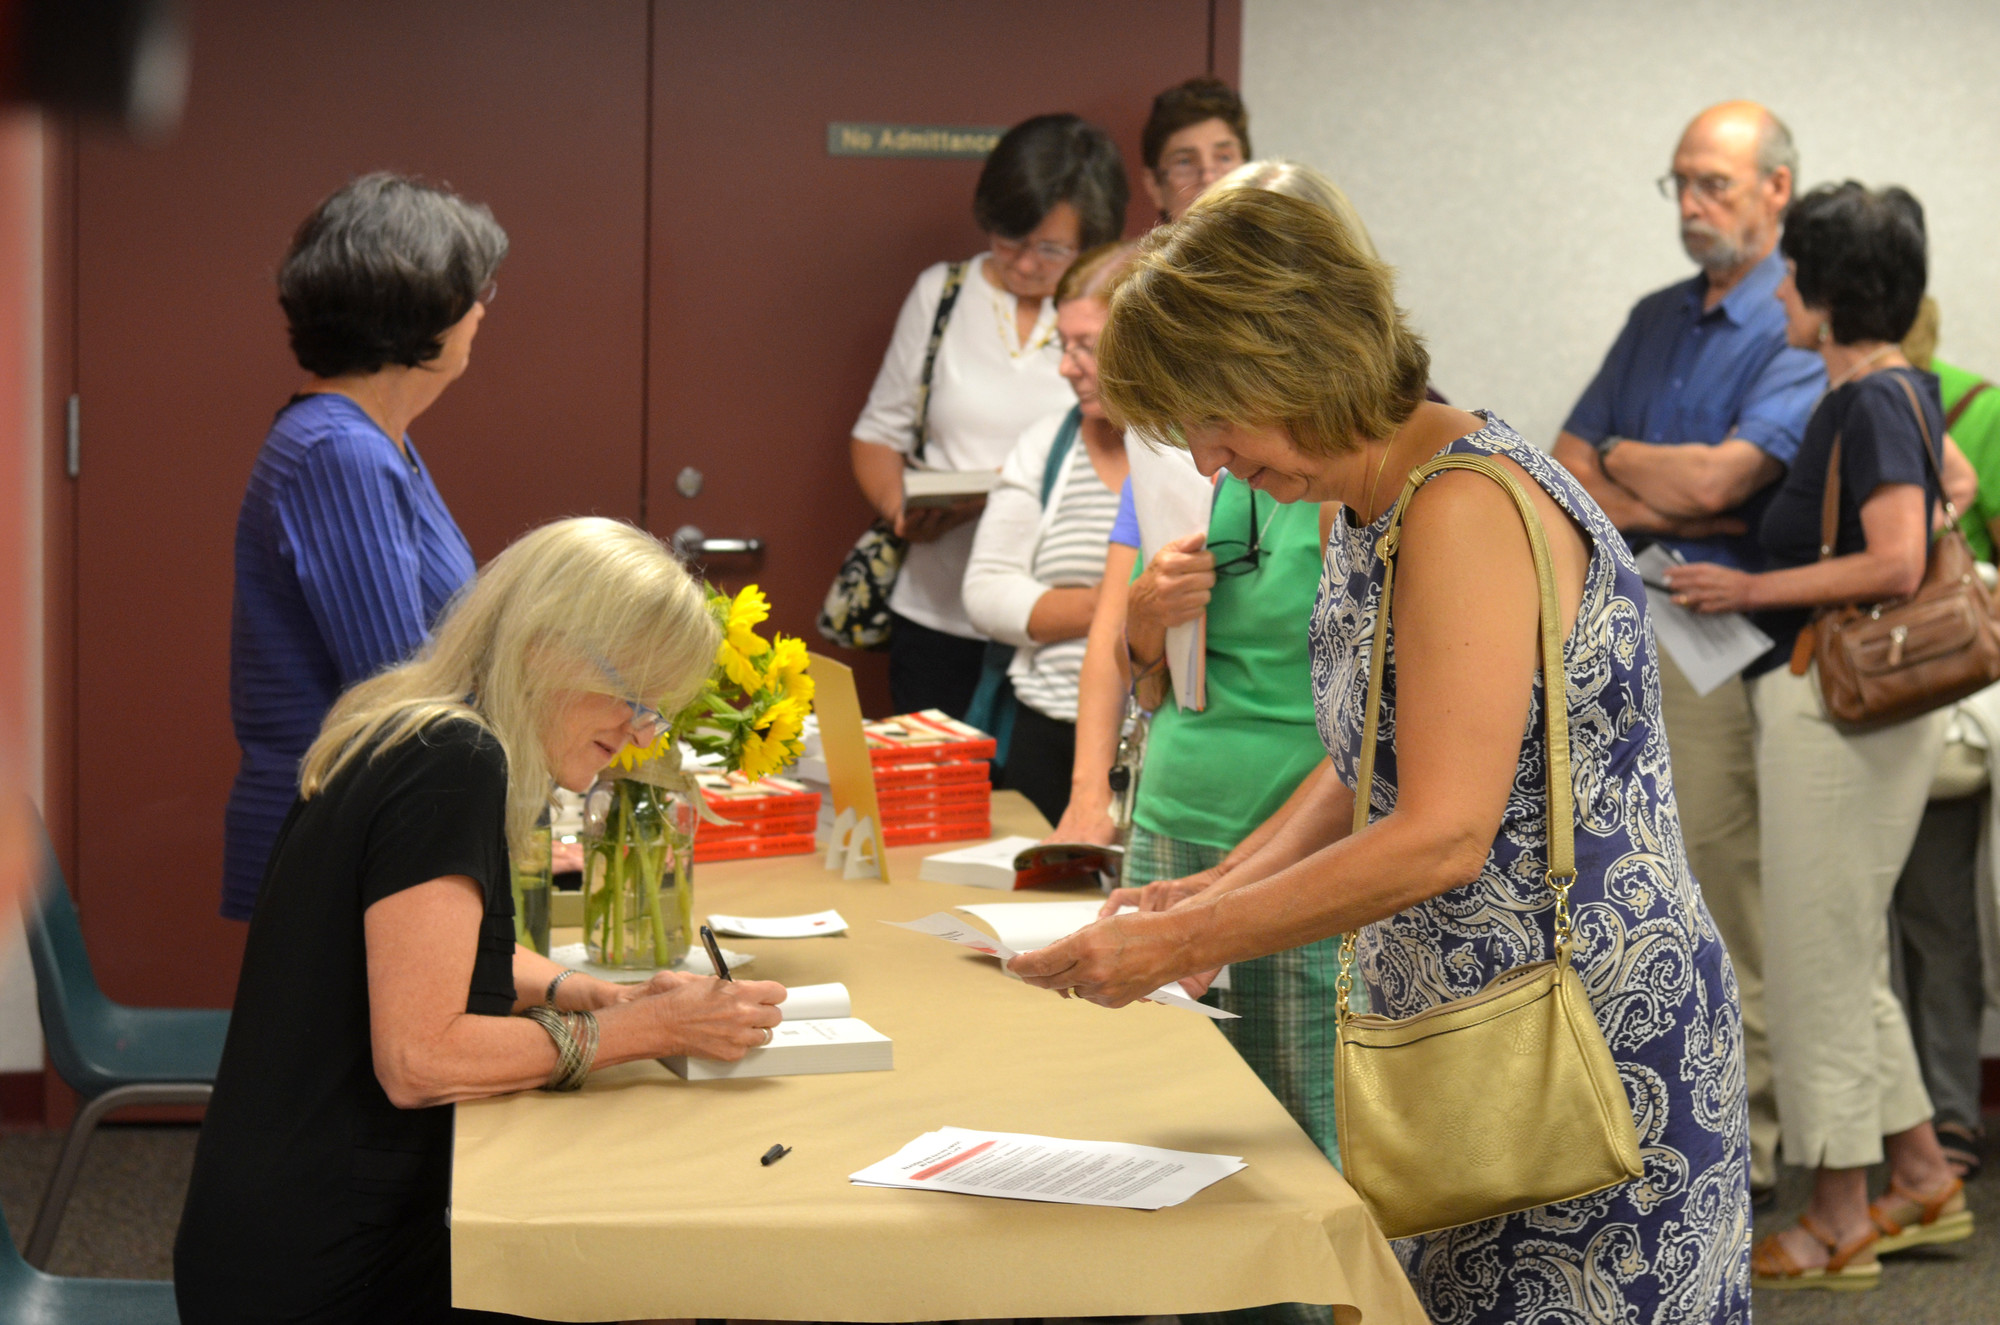 Kate Manning signed her book, for Barbara Reiser of Malverne, who is a Teacher's assistant at South Side Middle School.